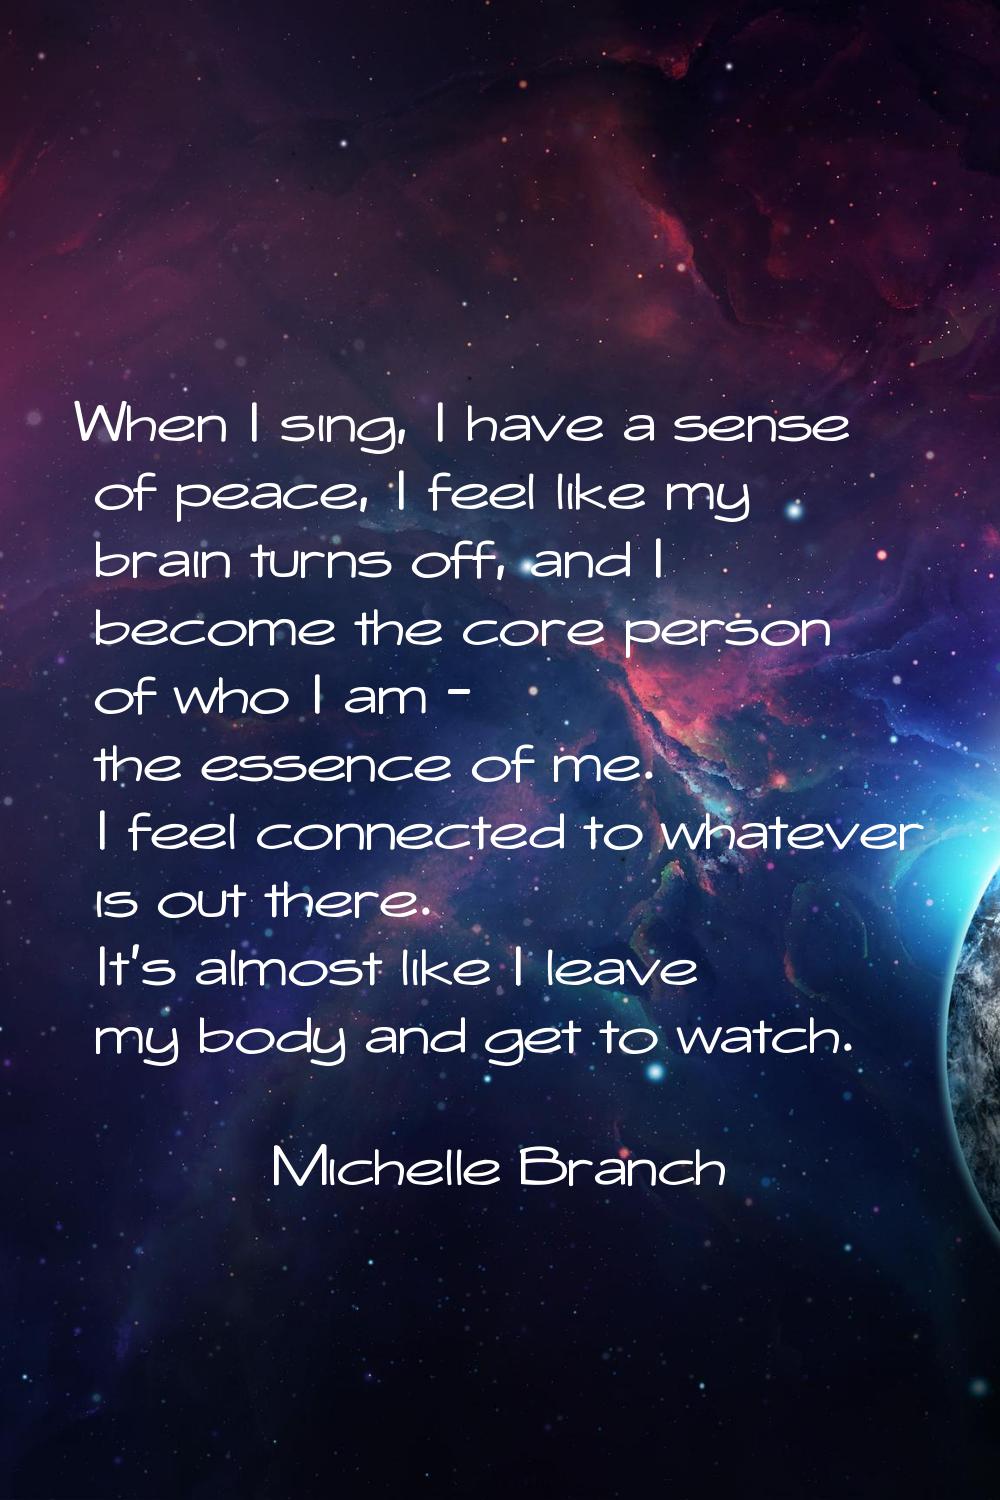 When I sing, I have a sense of peace, I feel like my brain turns off, and I become the core person 